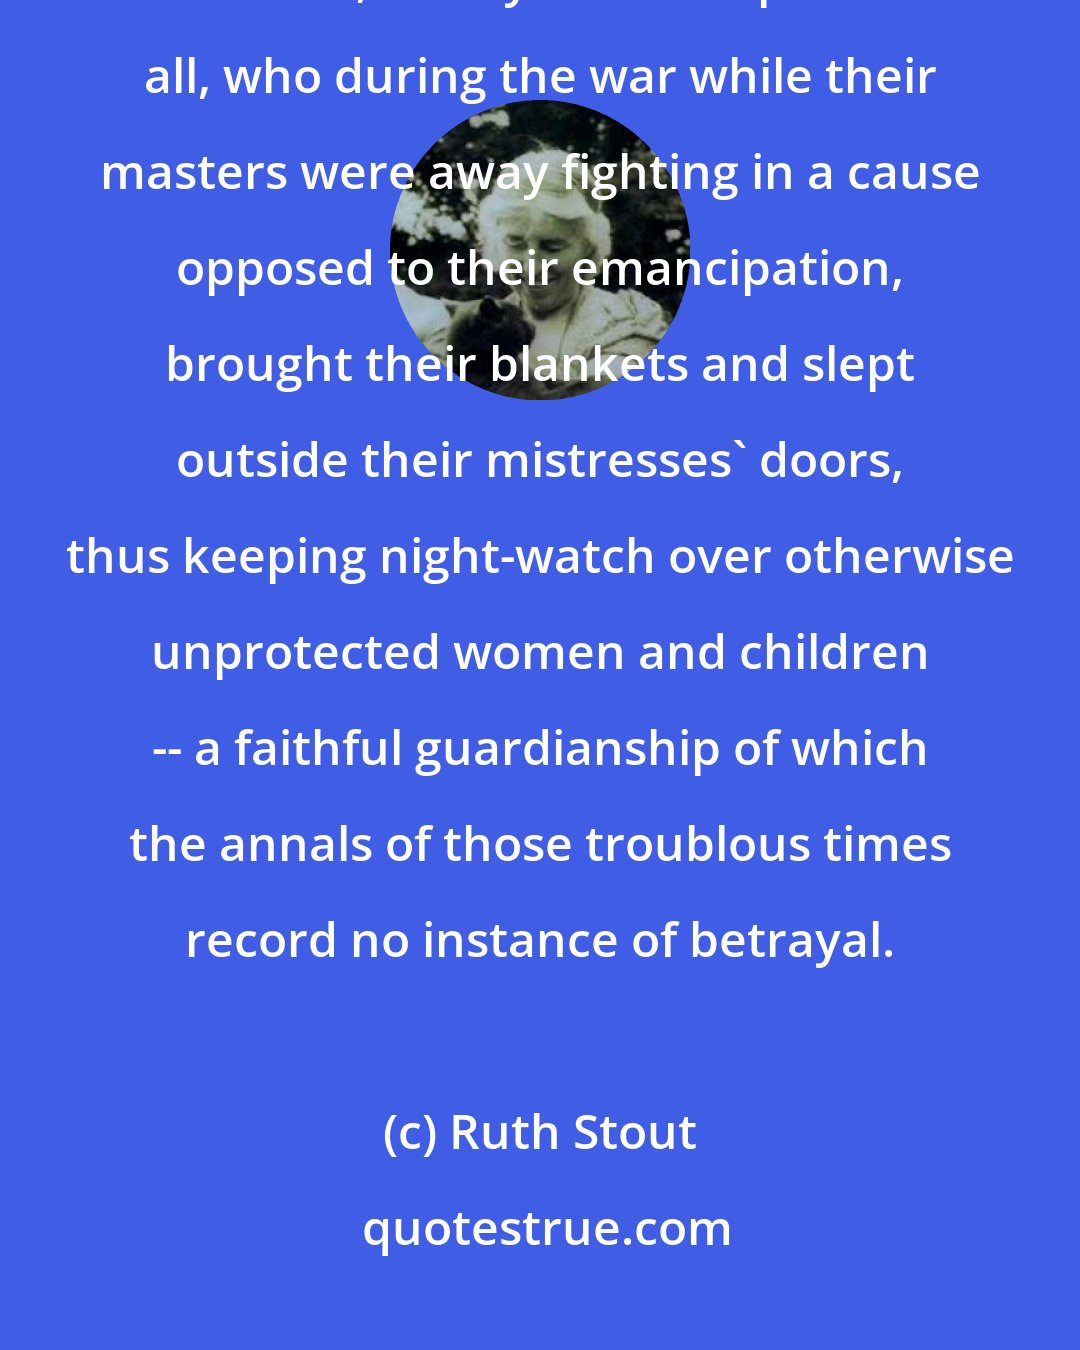 Ruth Stout: To the Memory of those faithful brown slave-men of the plantations throughout the South, Daddy's contemporaries all, who during the war while their masters were away fighting in a cause opposed to their emancipation, brought their blankets and slept outside their mistresses' doors, thus keeping night-watch over otherwise unprotected women and children -- a faithful guardianship of which the annals of those troublous times record no instance of betrayal.